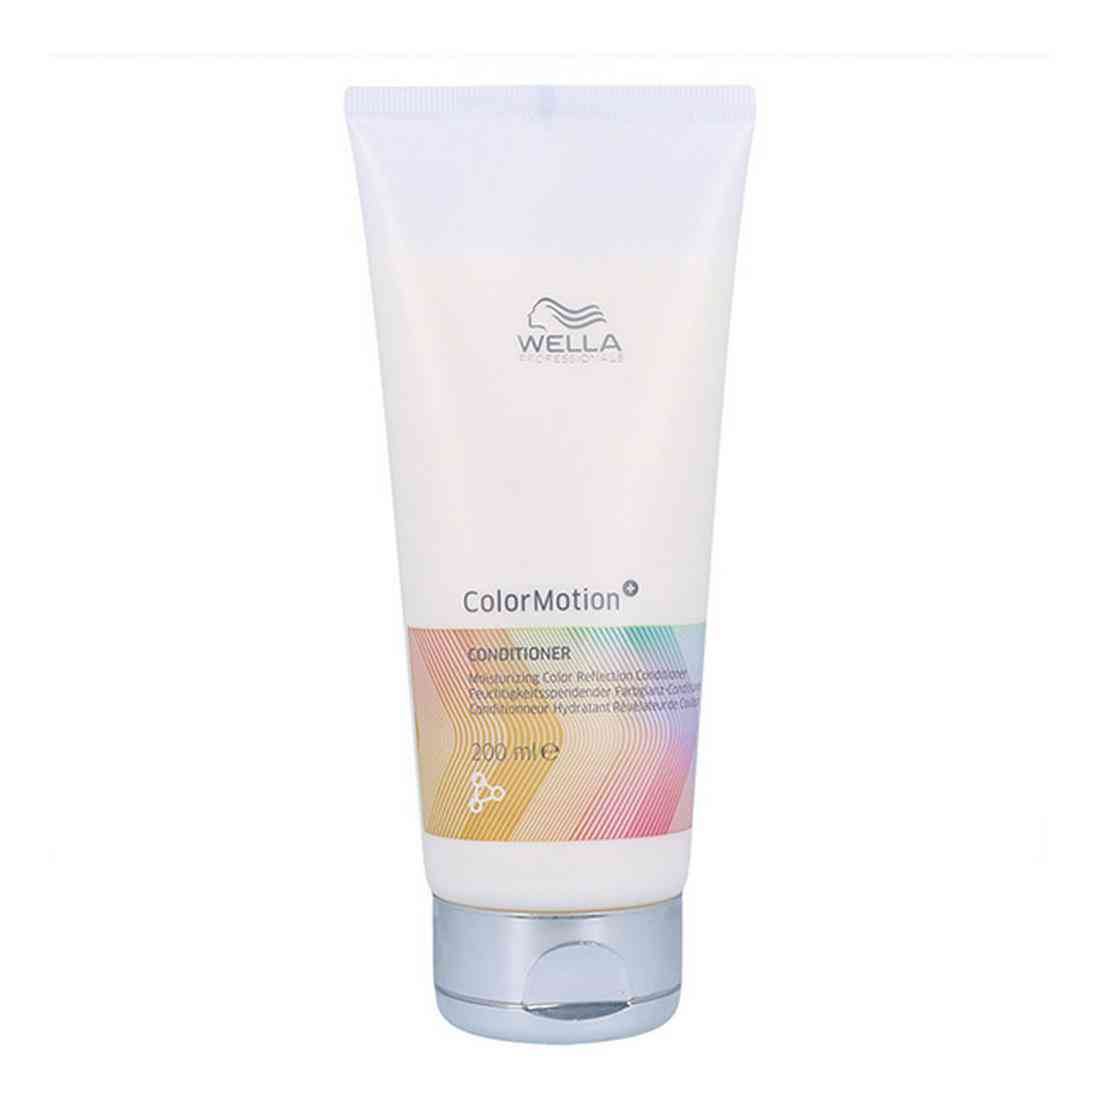 apres shampooing color motion wella 200 ml